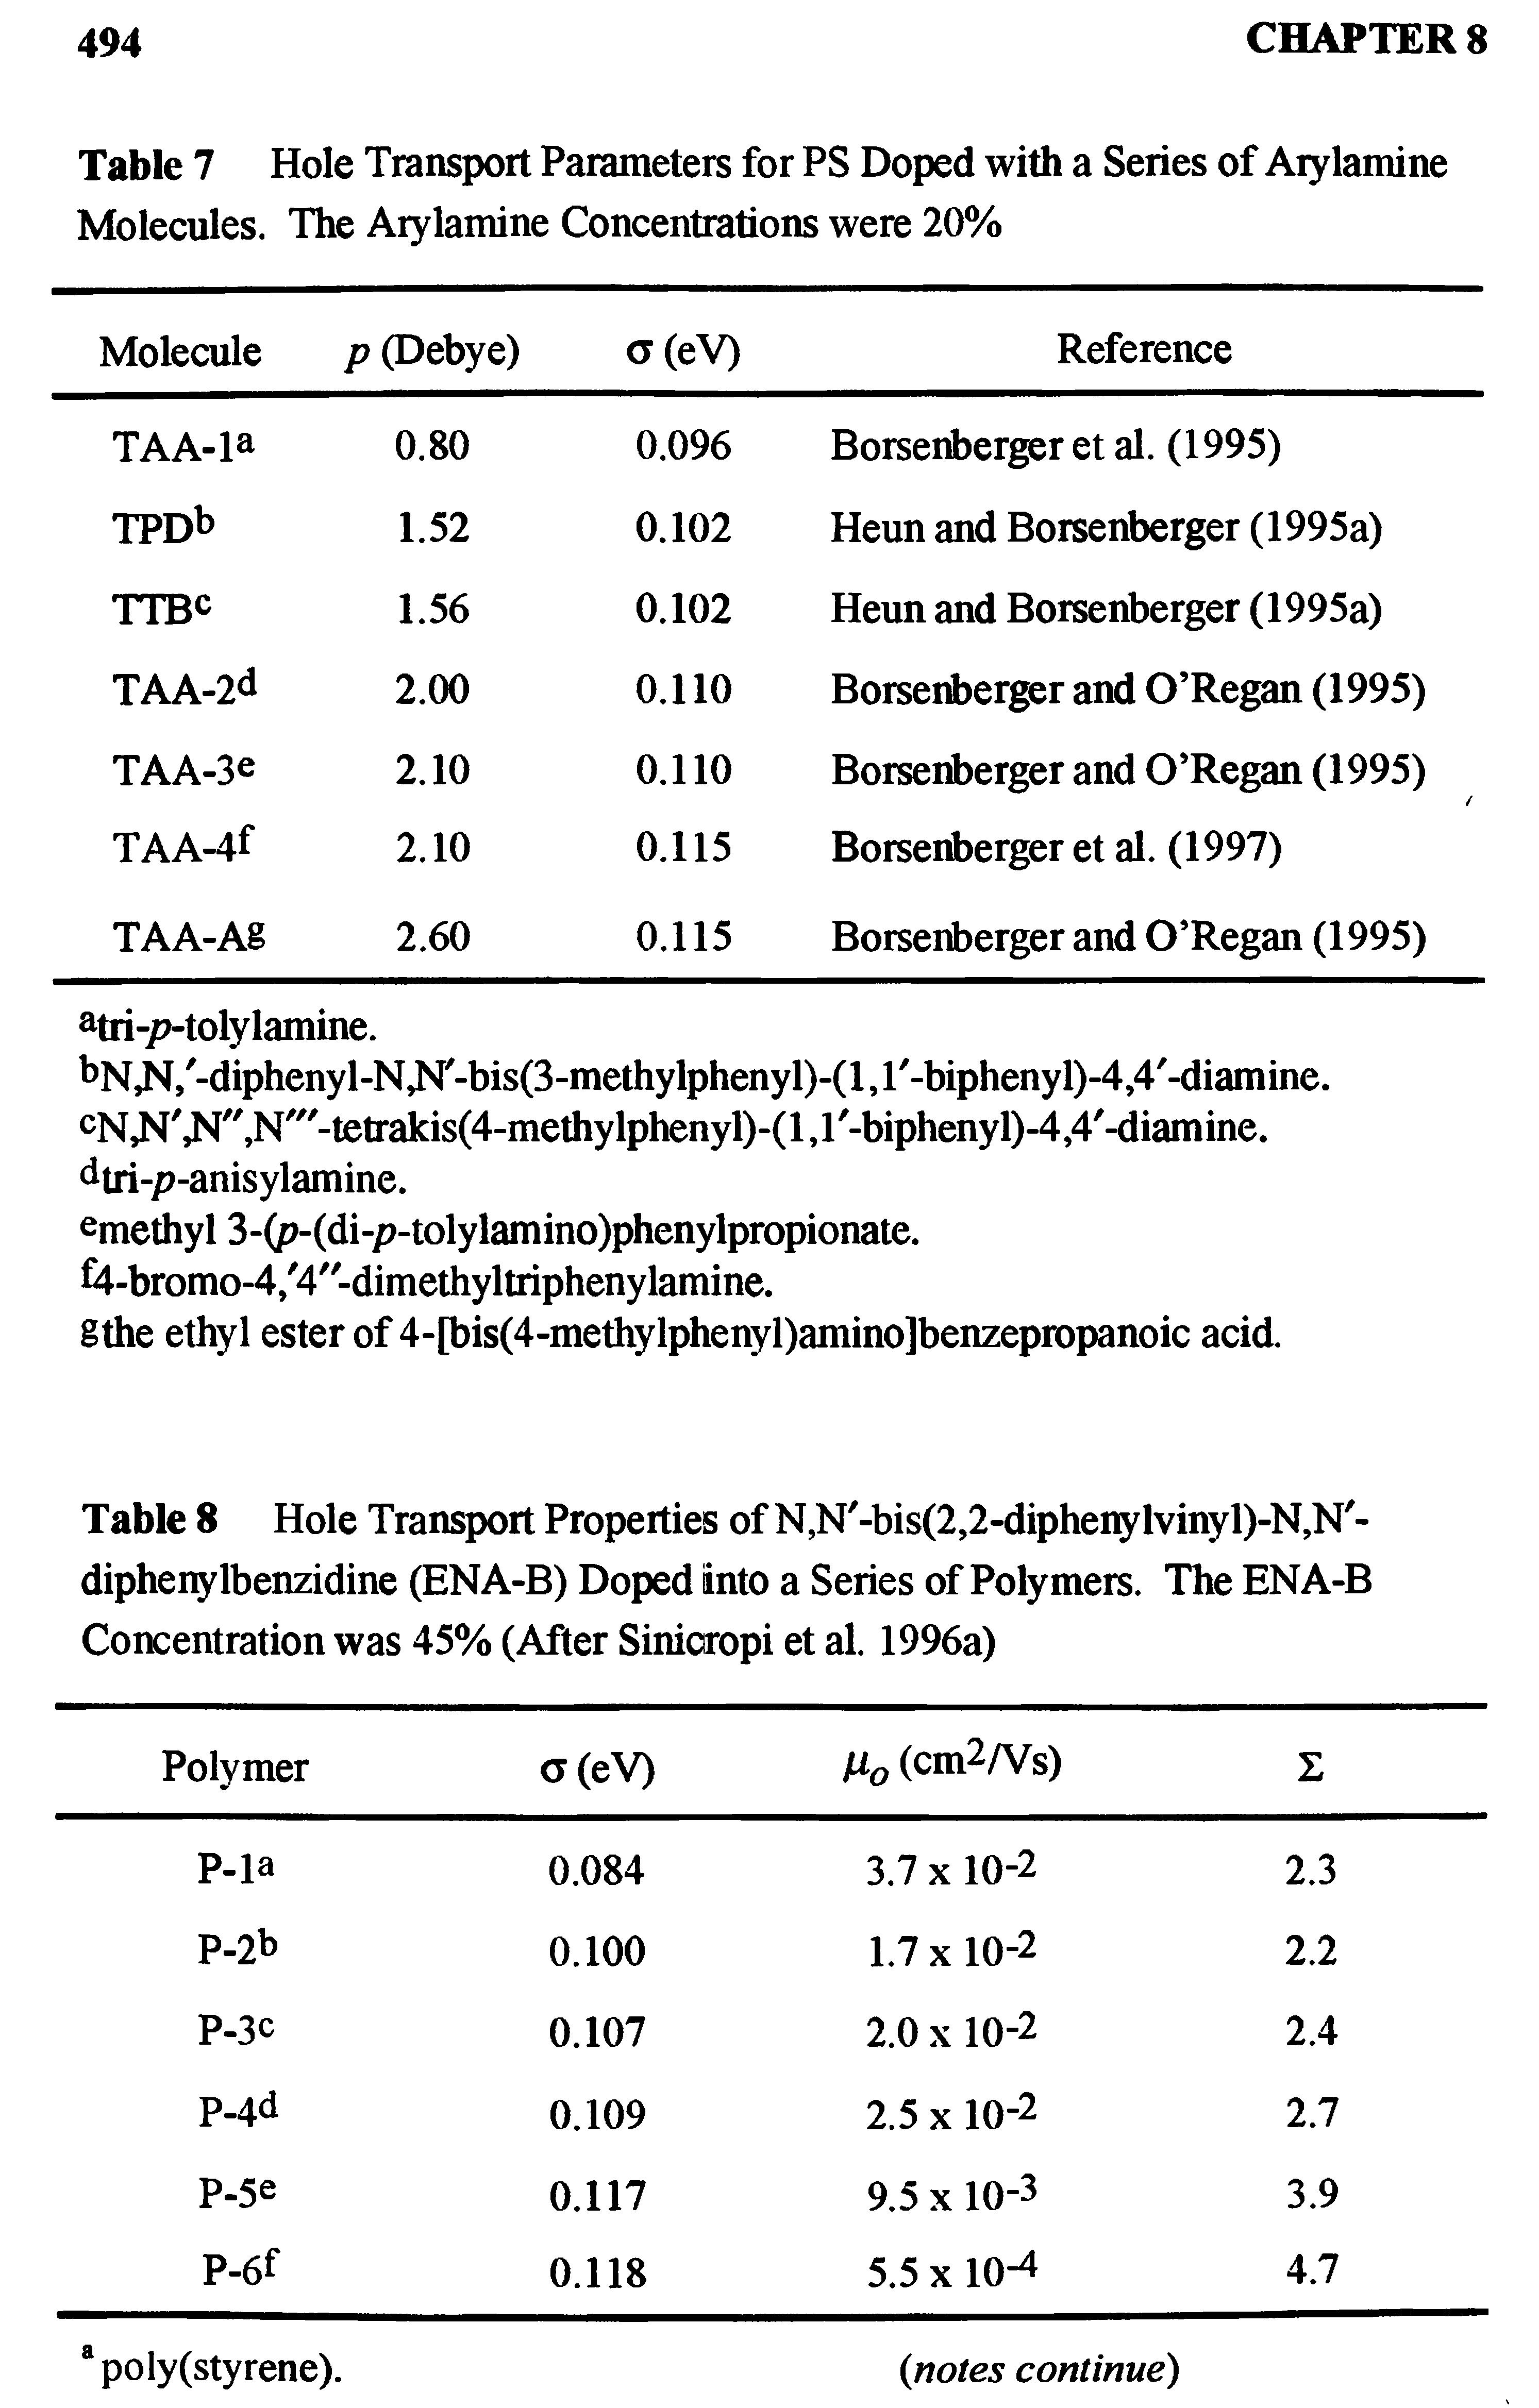 Table 8 Hole Transport Properties of N,N -bis(2,2-diphenylvinyl)-N,N/-diphenylbenzidine (ENA-B) Doped into a Series of Polymers. The ENA-B Concentration was 45% (After Siniaropi et al. 1996a)...